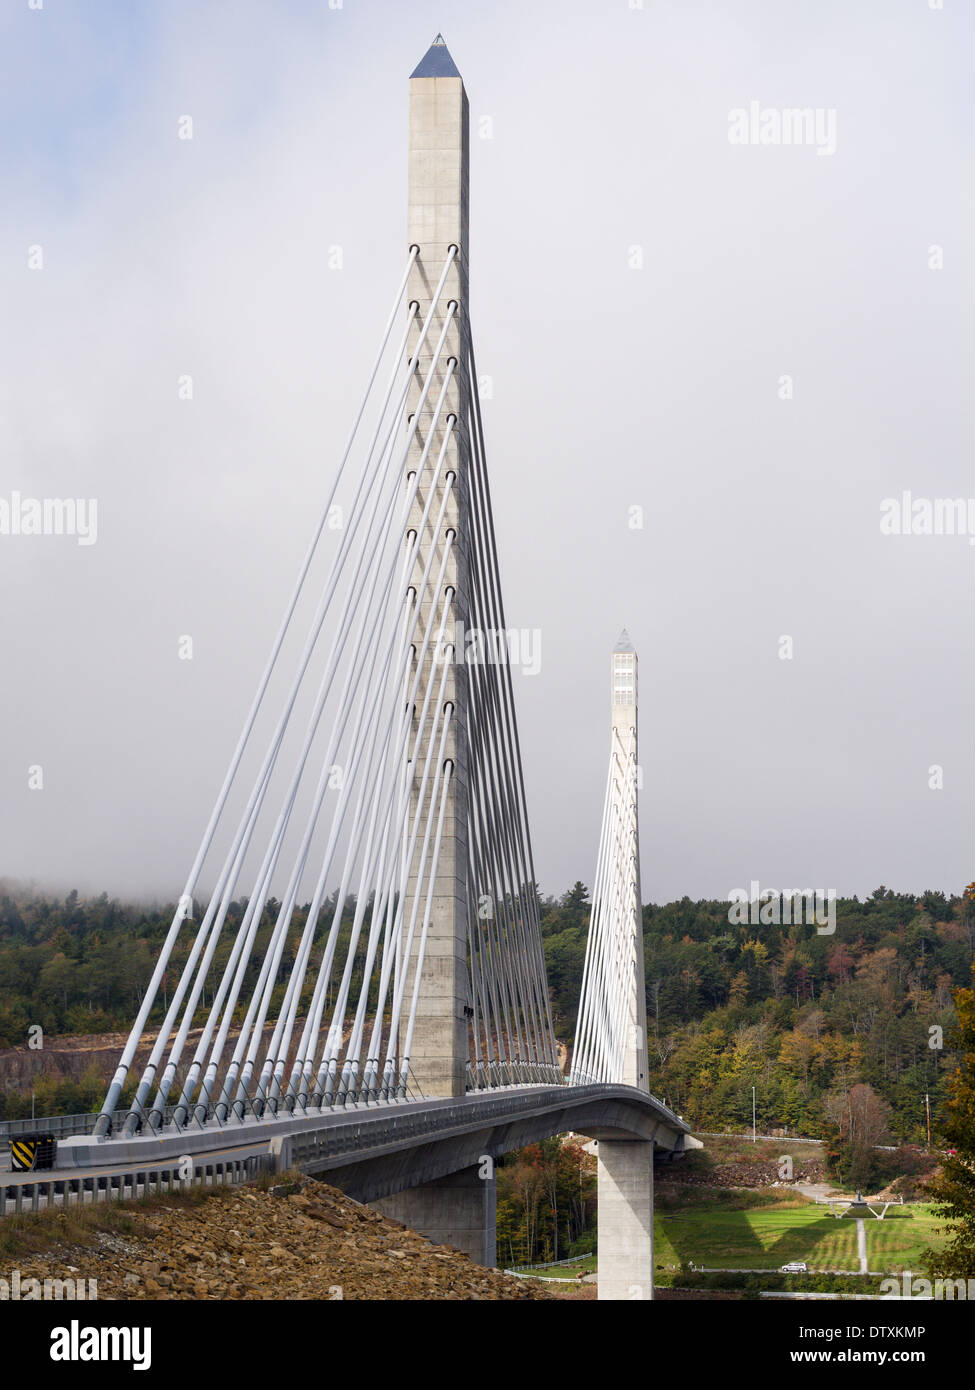 Penobscot Bridge early Fall. The twin towers of this iconic modern bridge rise above the wooded landscape lit by a weak sun Stock Photo